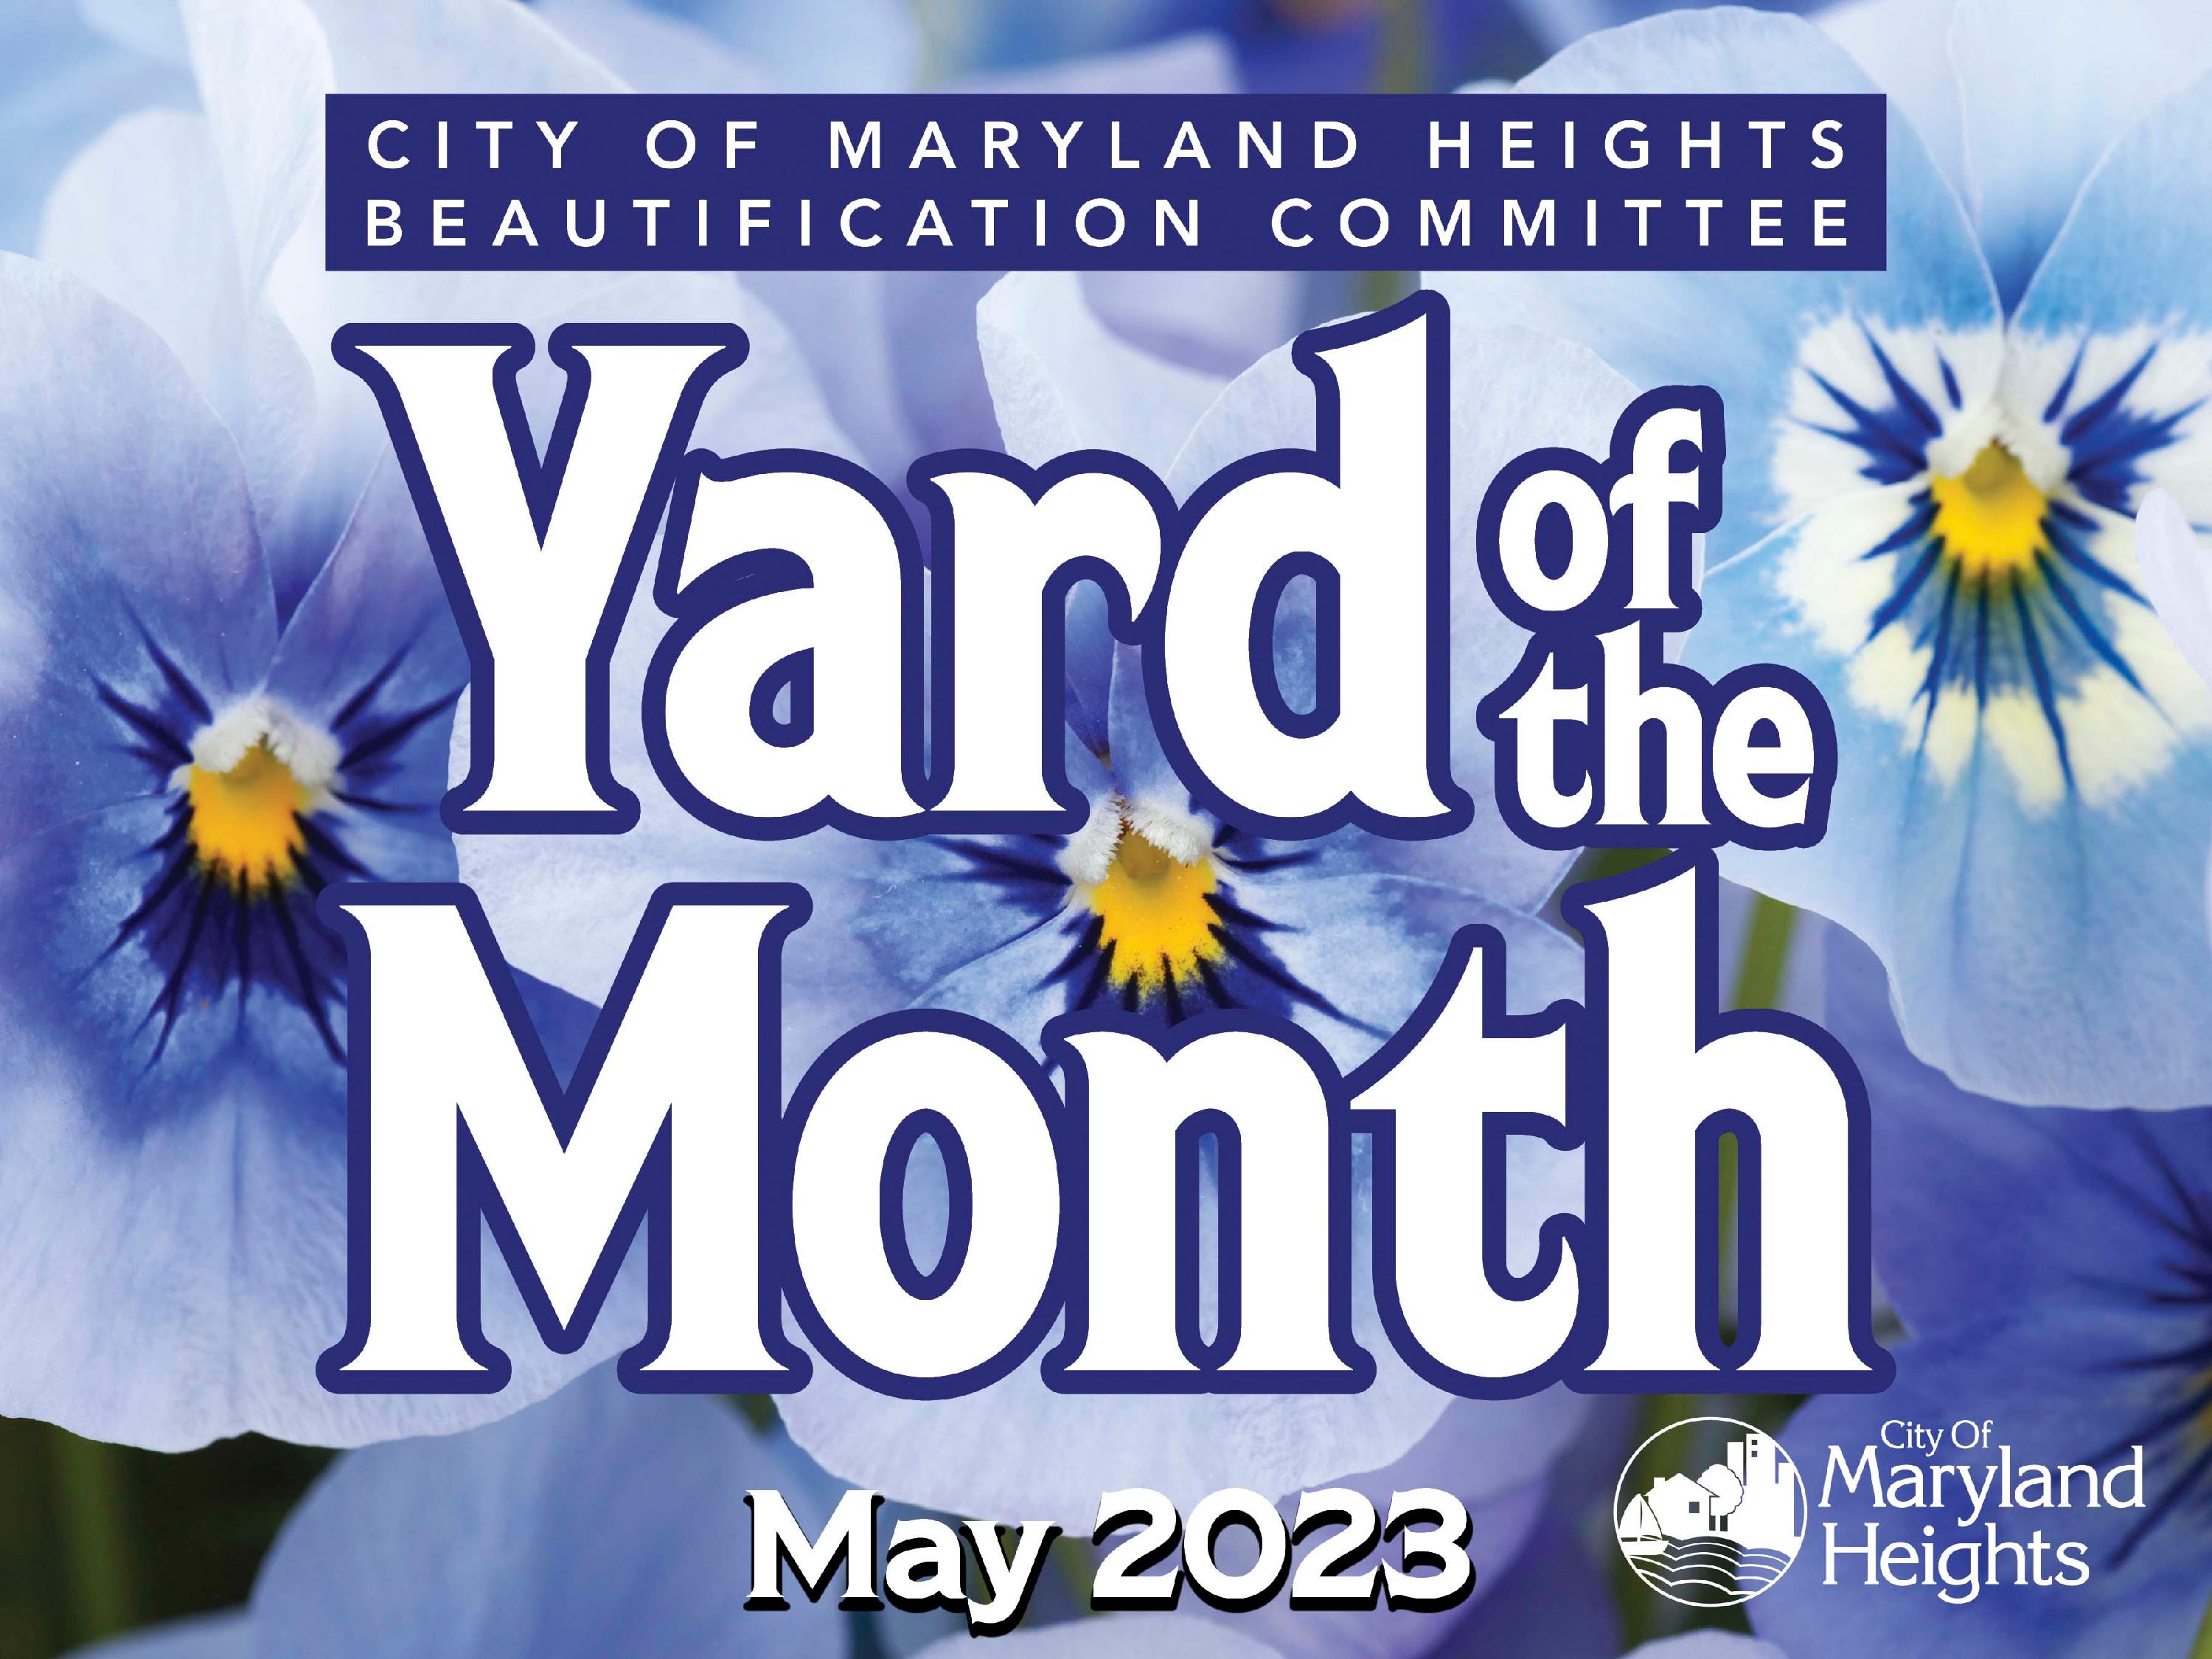 The text "City of Maryland Heights Beautification Committee." "Yard of the Month," and "May 2023" lies on top a backdrop of blue flowers. The City logo lies on the bottom right corner.